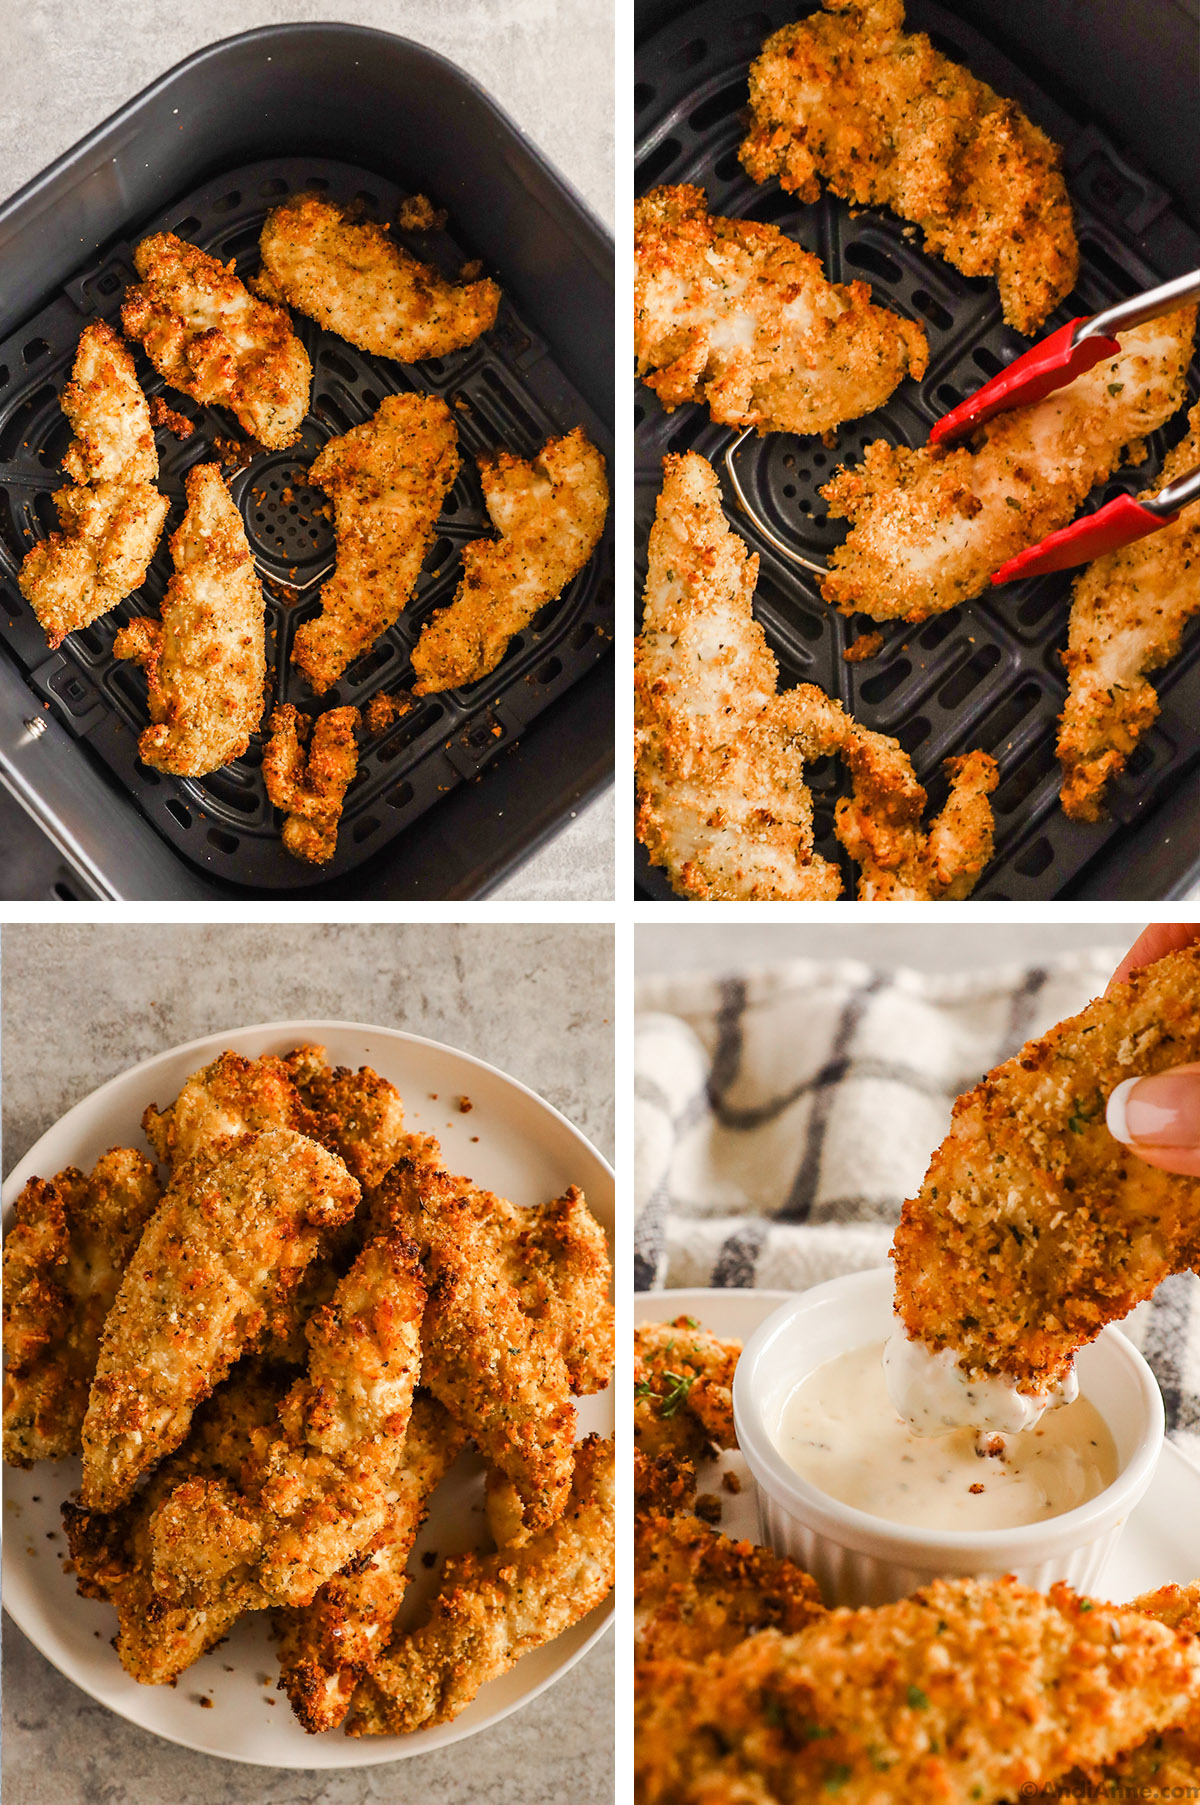 Crispy chicken tenders in an air fryer basket. Tongs grabbing one piece from the basket. A plate with crispy chicken fingers, and a and dipping a chicken finger into ranch dip.